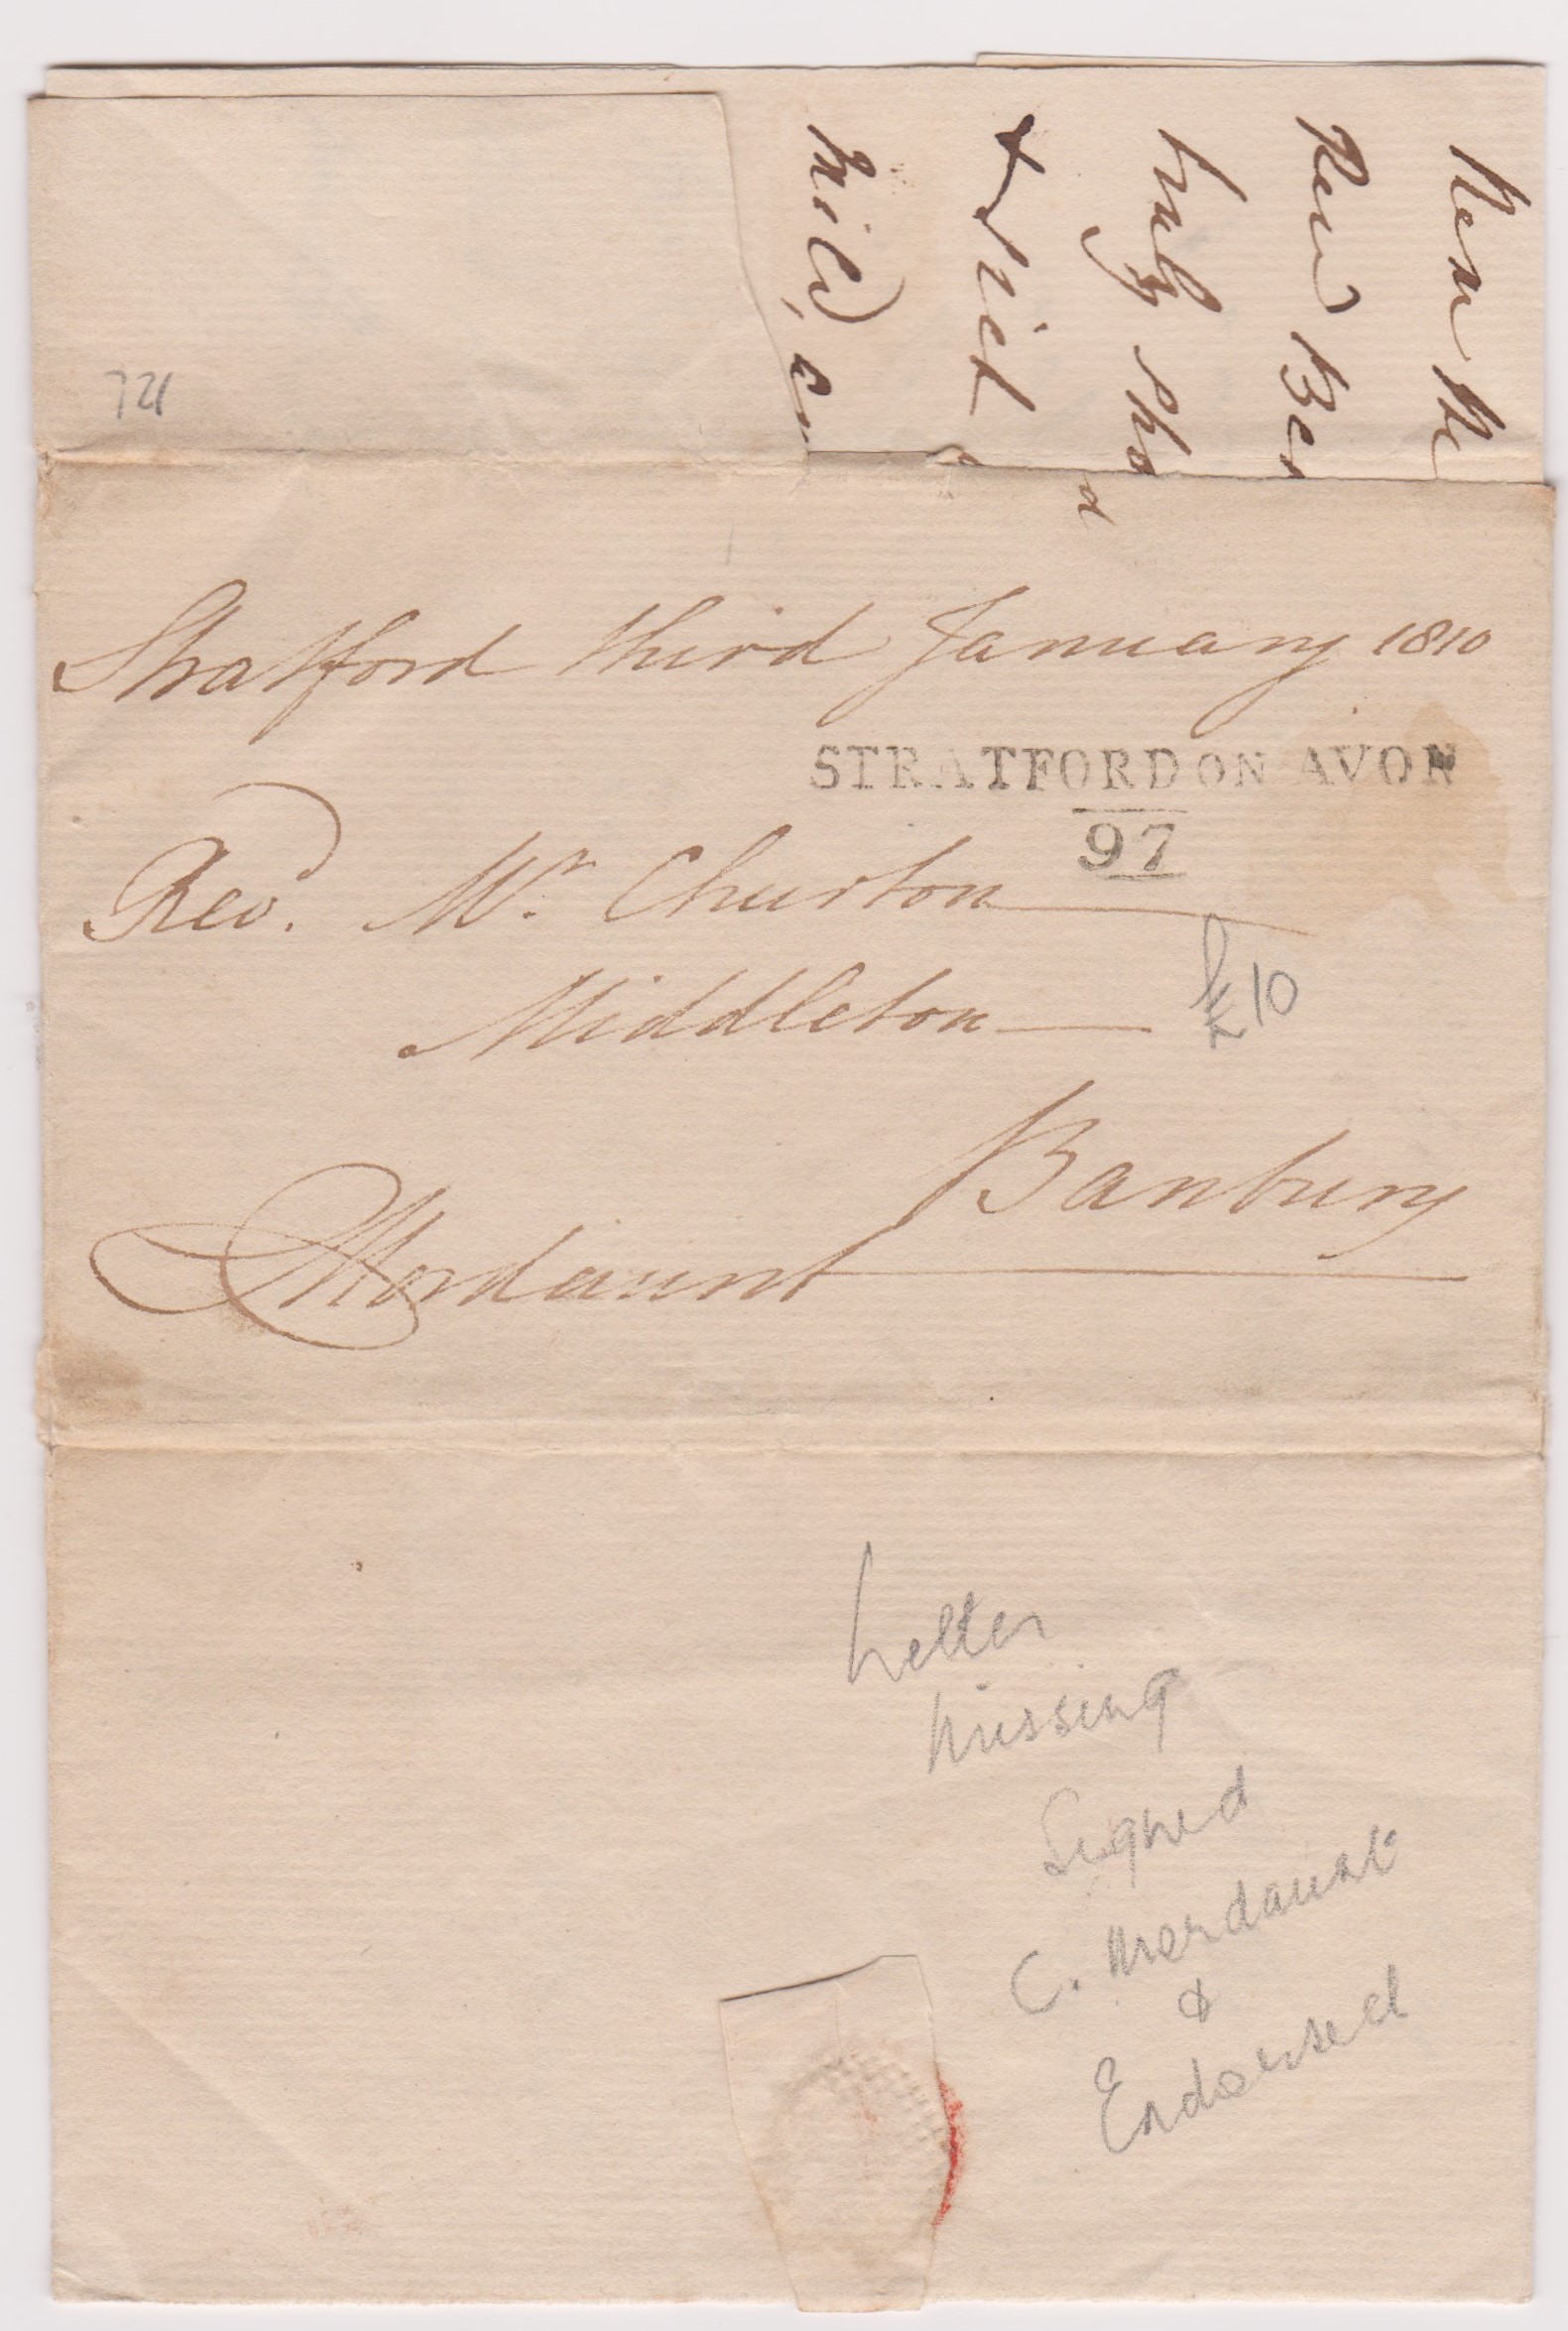 Great Britain 1810 - Postal History wrapper and letter dated Jan 3rd 1810-Stratford posted to